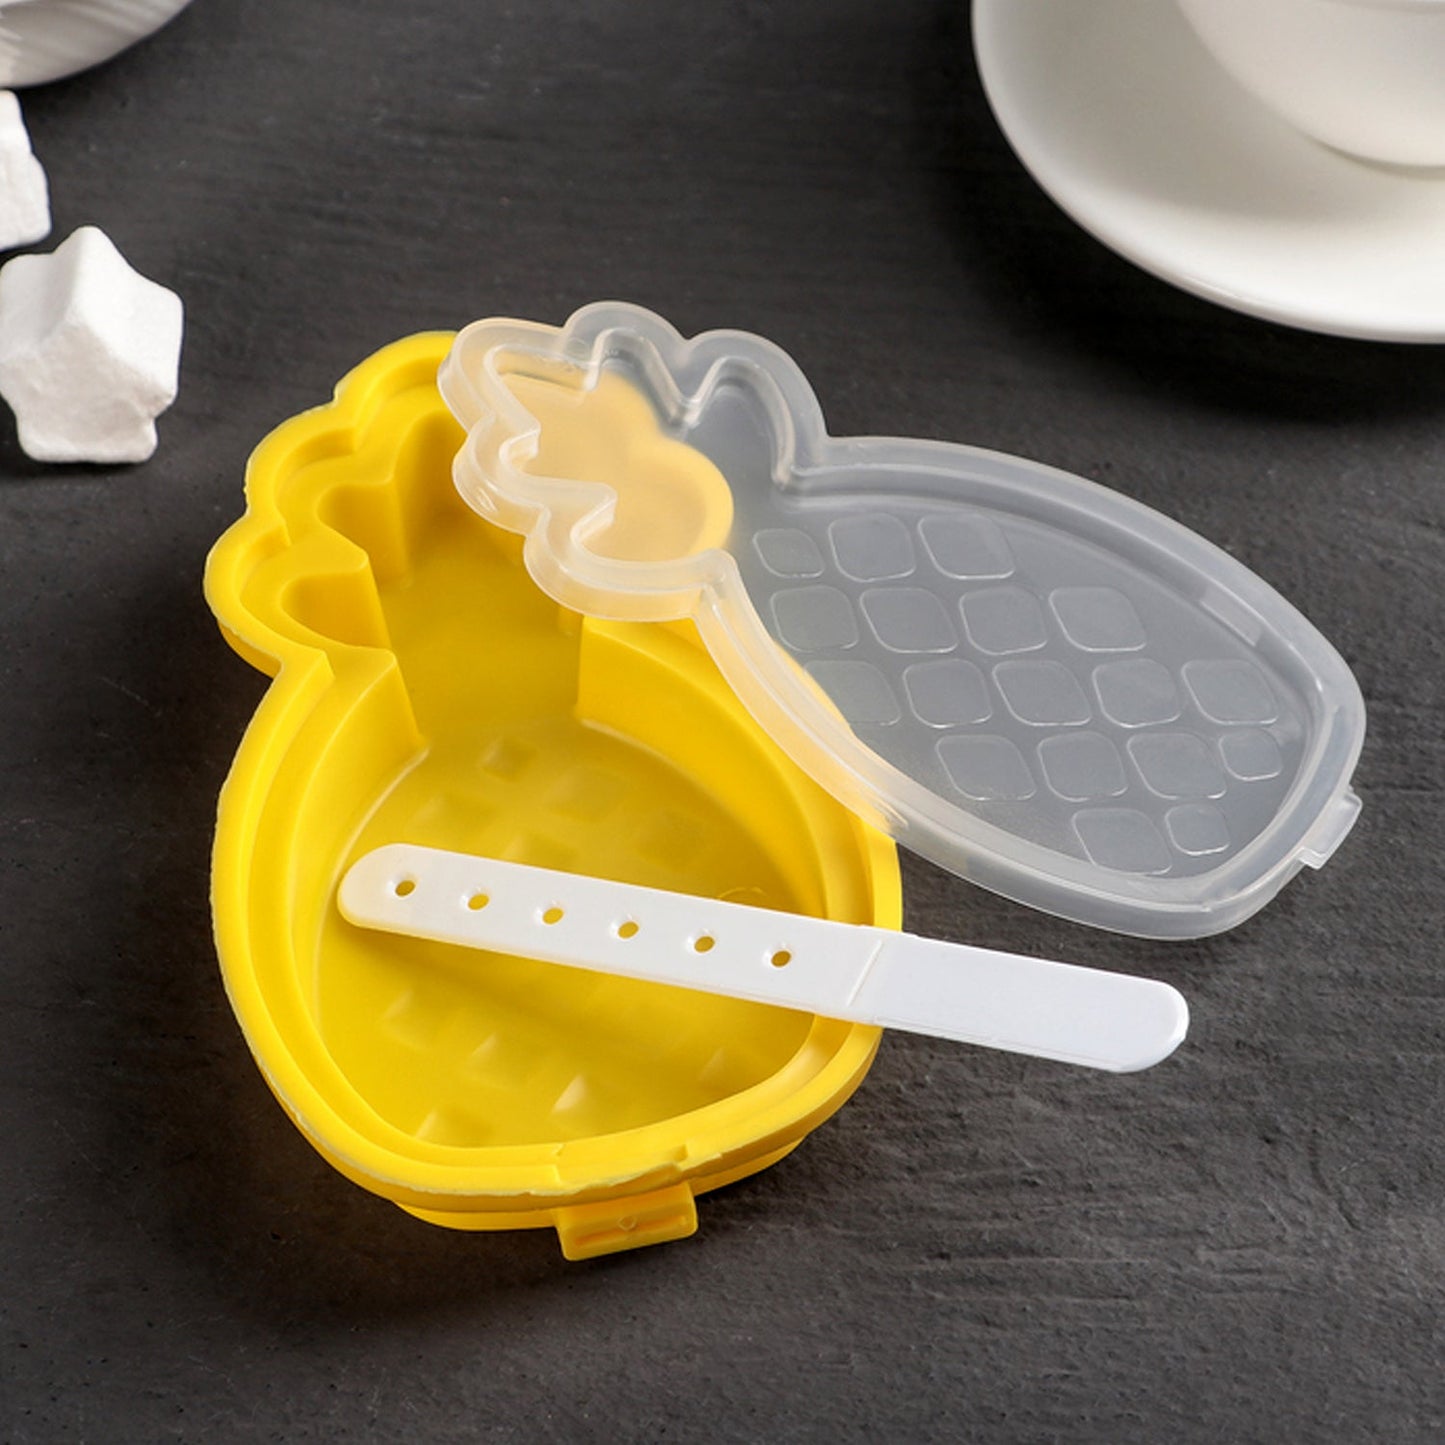 Durable Pineapple Shape Ice Candy Cream Mould Silicone Popsicle Mold Ice Pop DIY Kitchen Tool Ice Molds